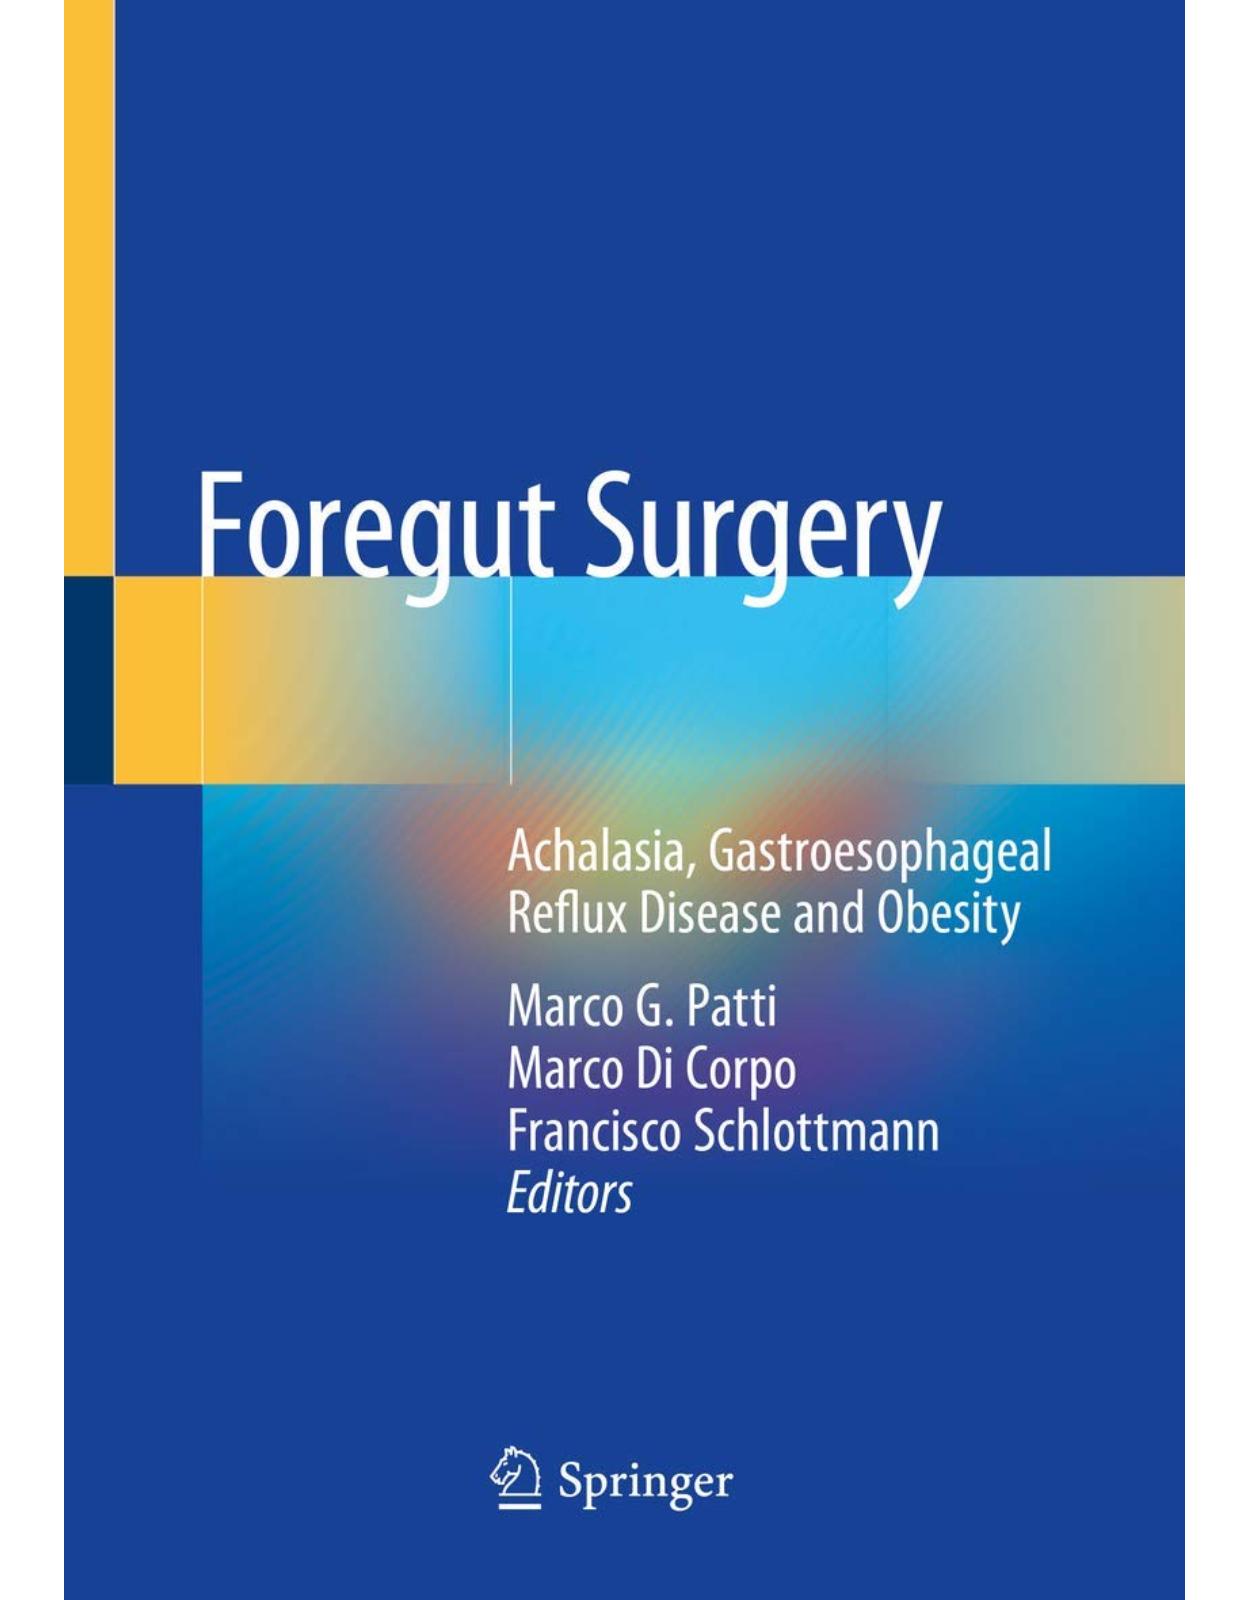 Foregut Surgery: Achalasia, Gastroesophageal Reflux Disease and Obesity